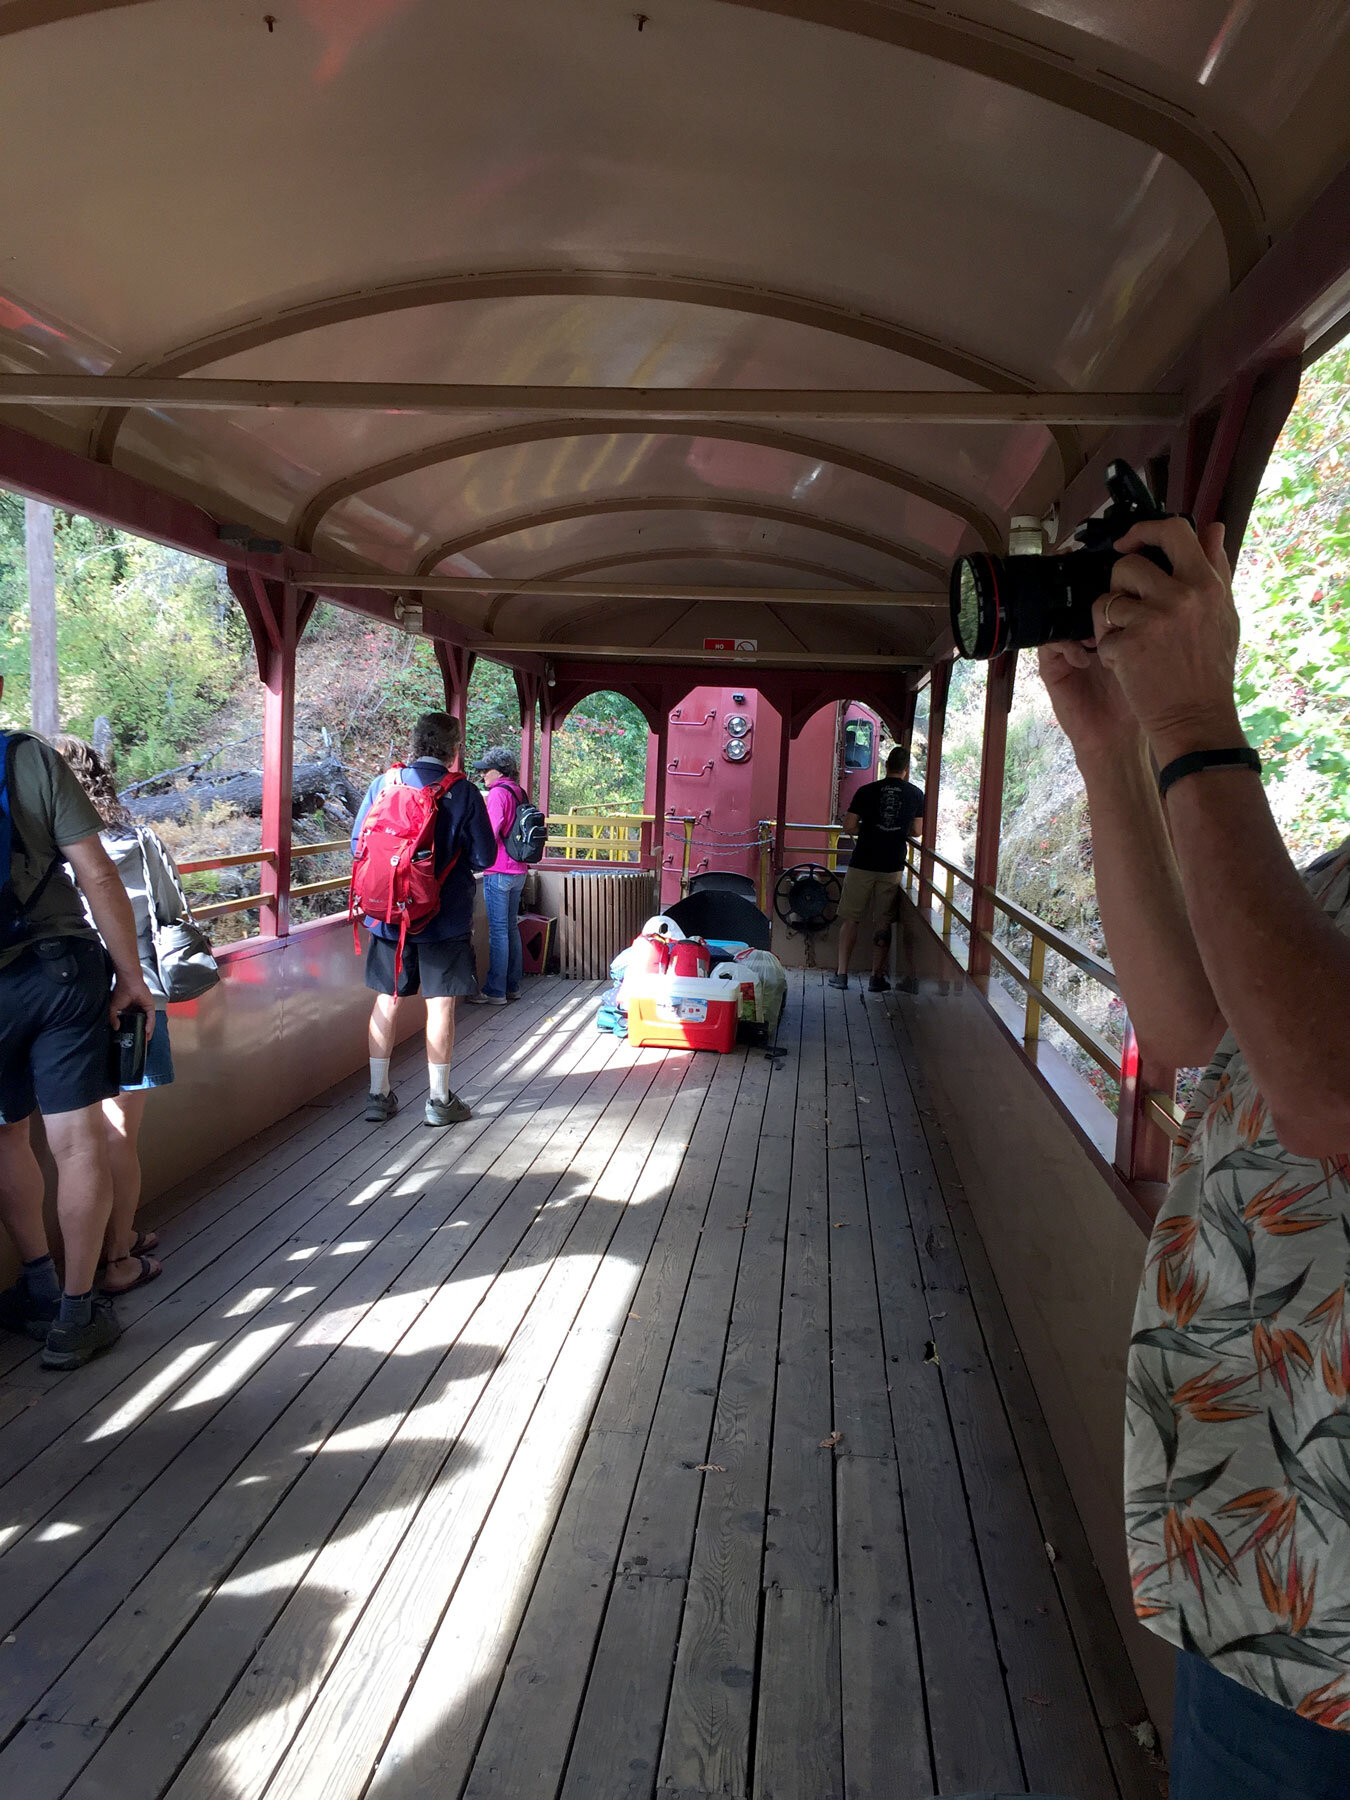 A day on the Skunk Train